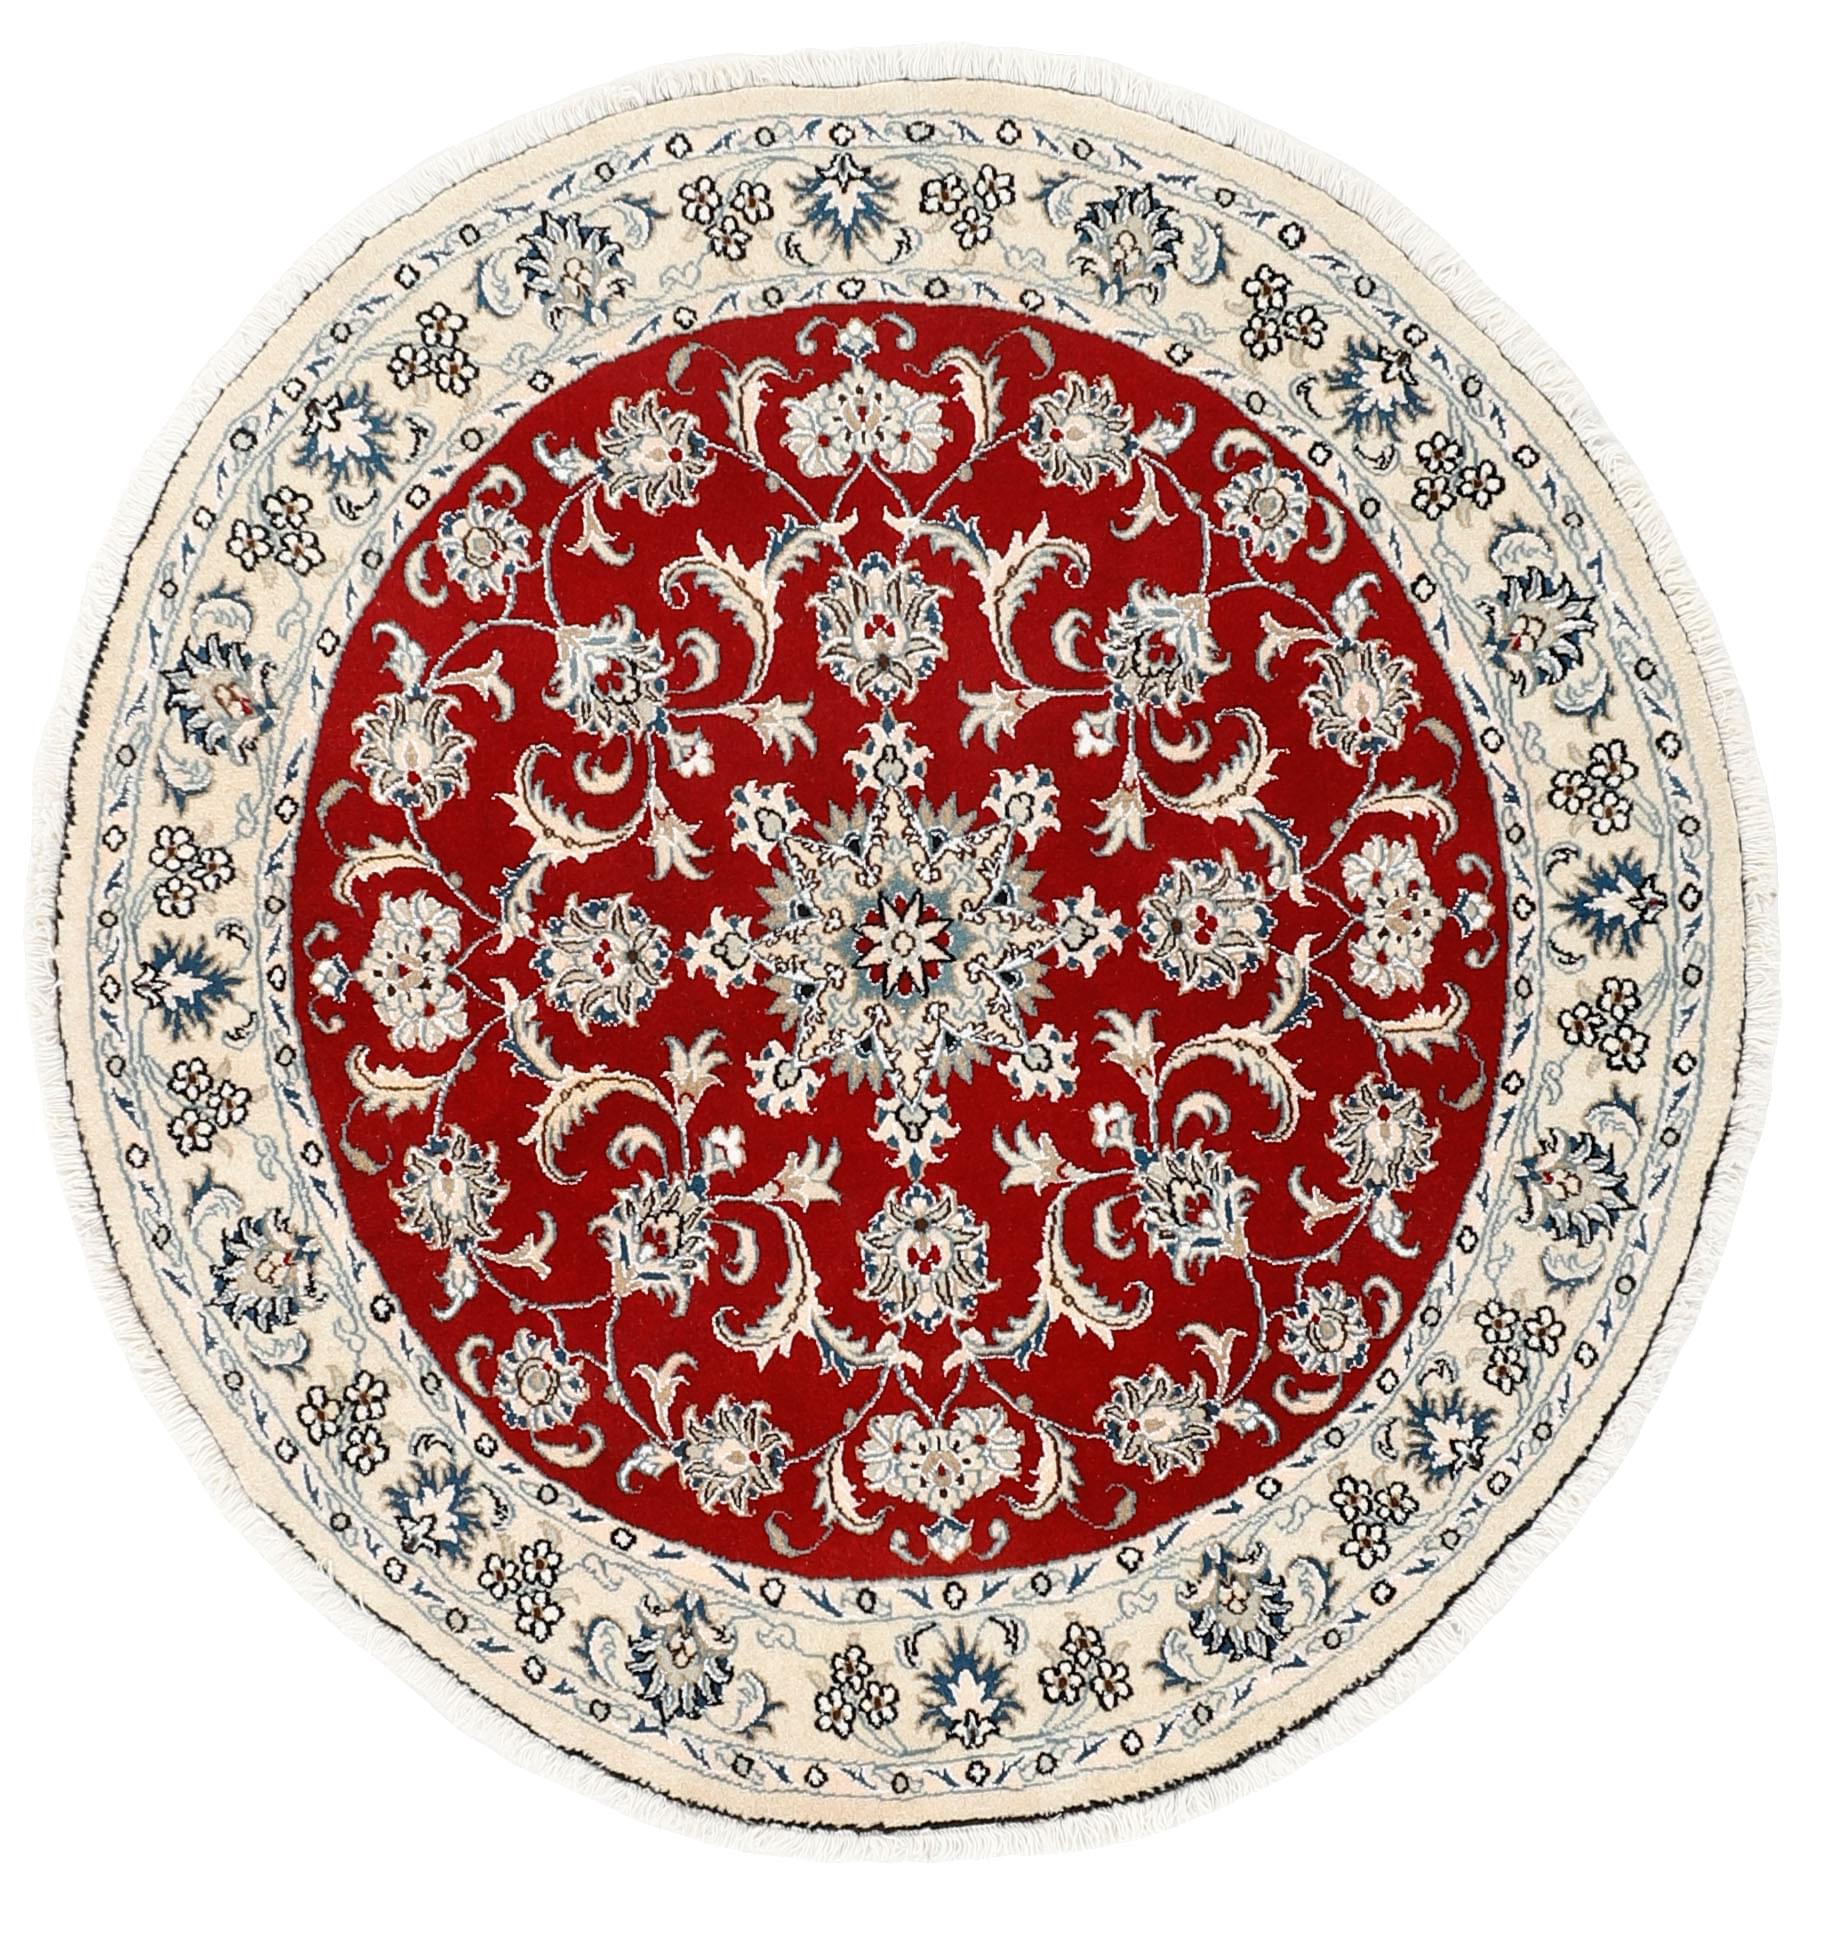 Authentic persian circle rug with a traditional floral design in beige and red